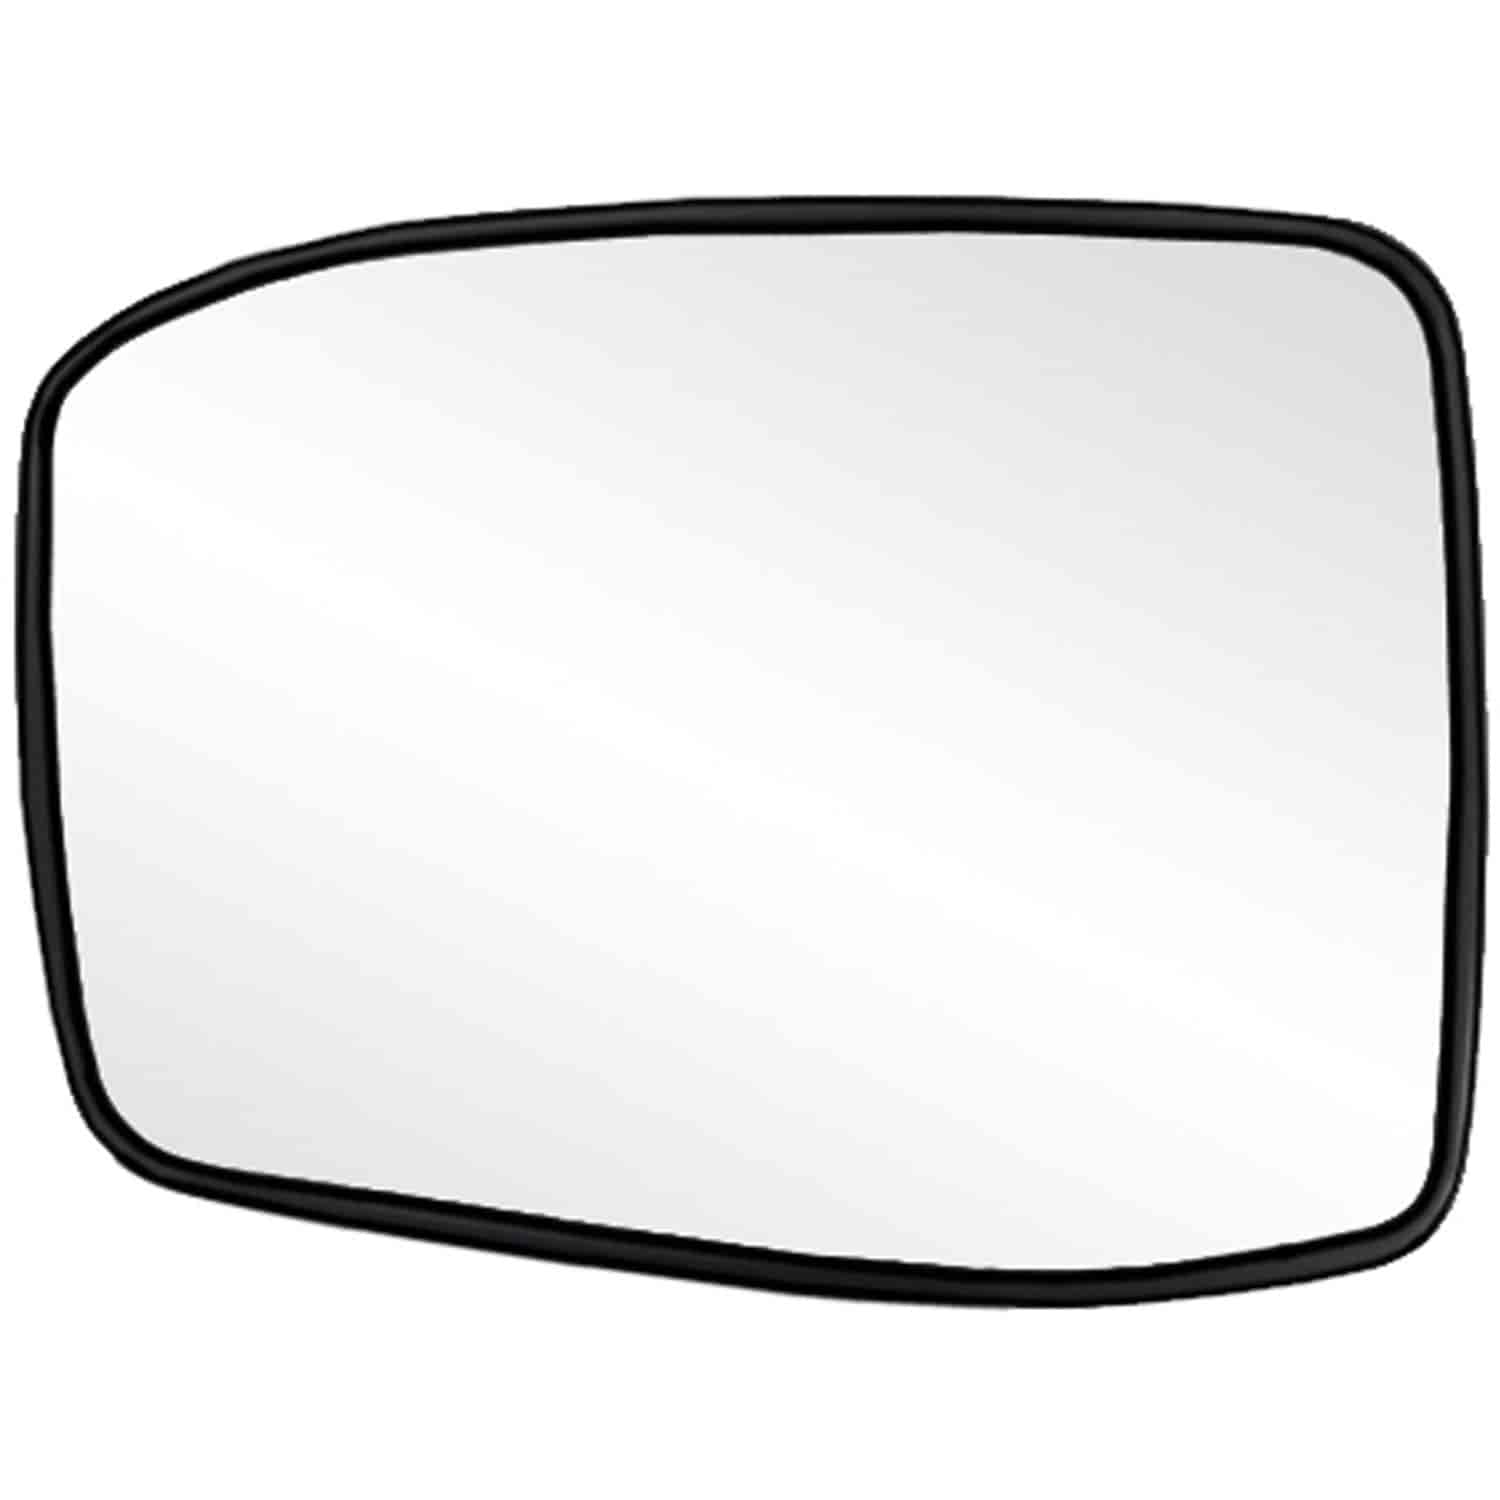 Replacement Glass Assembly for 05-10 Odyssey replace your cracked or broken driver side mirror glass